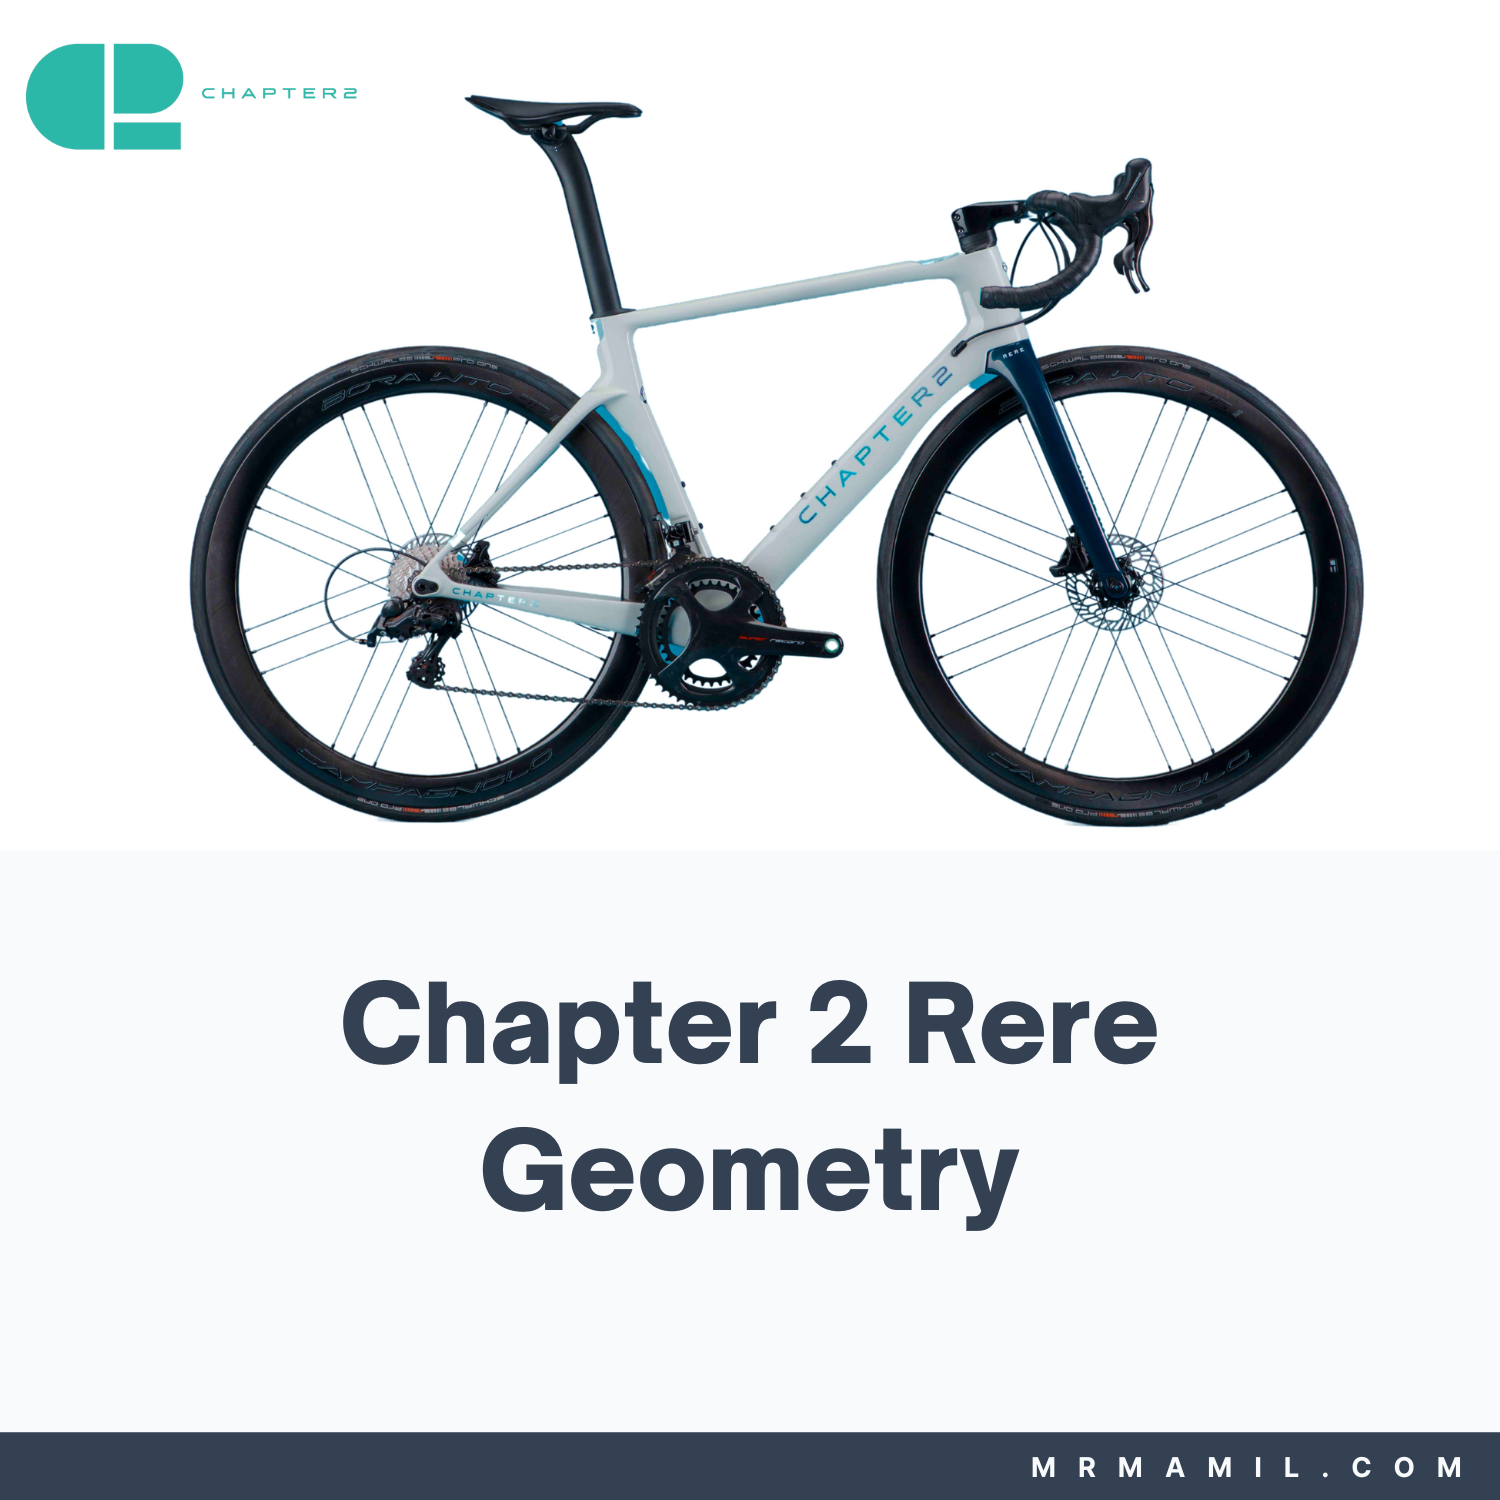 Chapter 2 Rere Frame Geometry